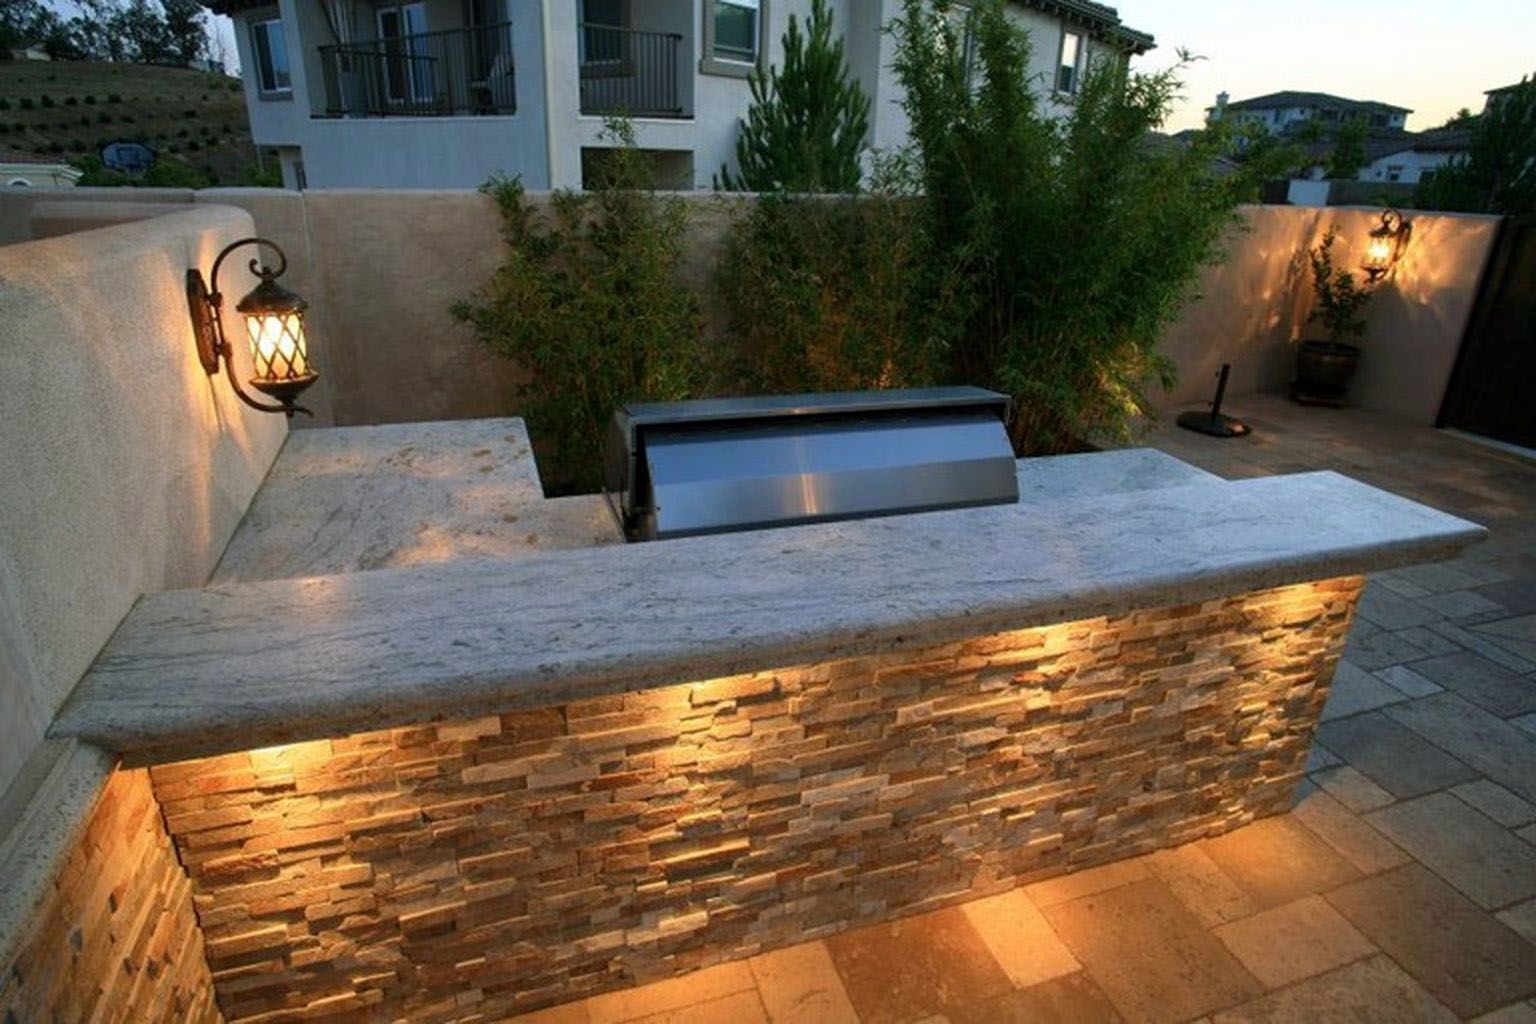 Creating The Outdoor Kitchen Just The Way You Need It